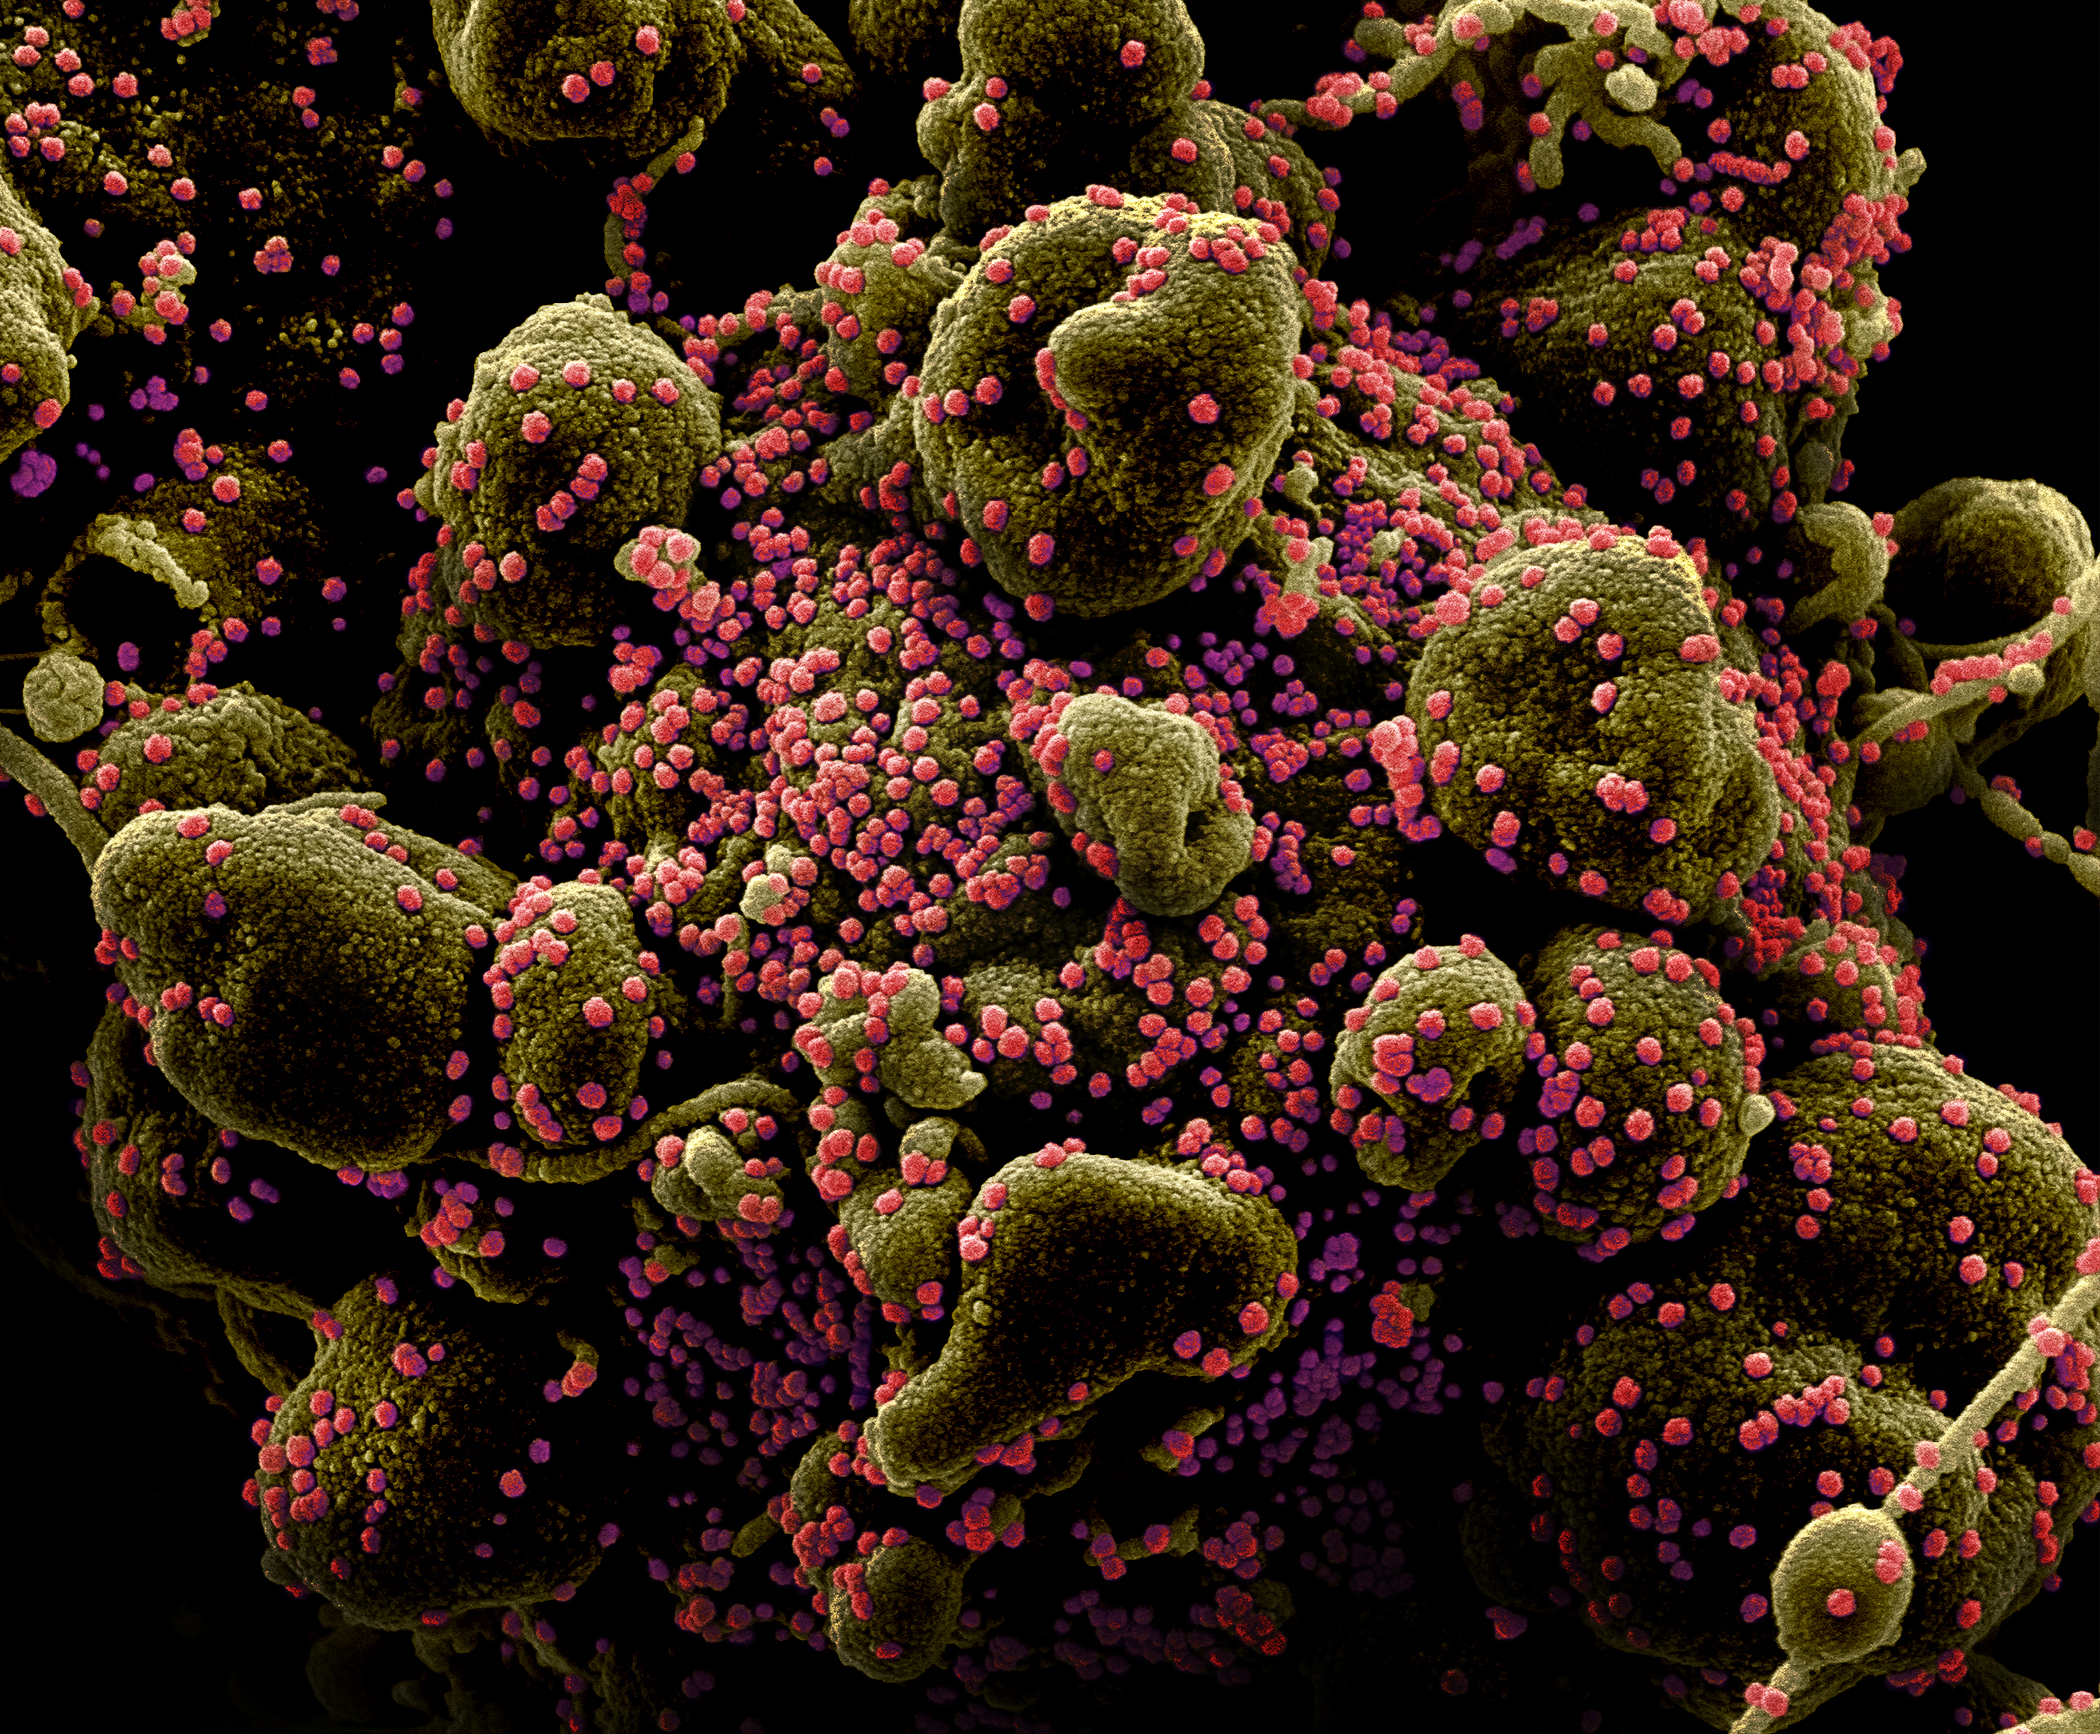 A scanning electron micrograph picture of SARS-CoV-2, the novel coronavirus, particles on the surface of a human cell undergoing apoptosis.